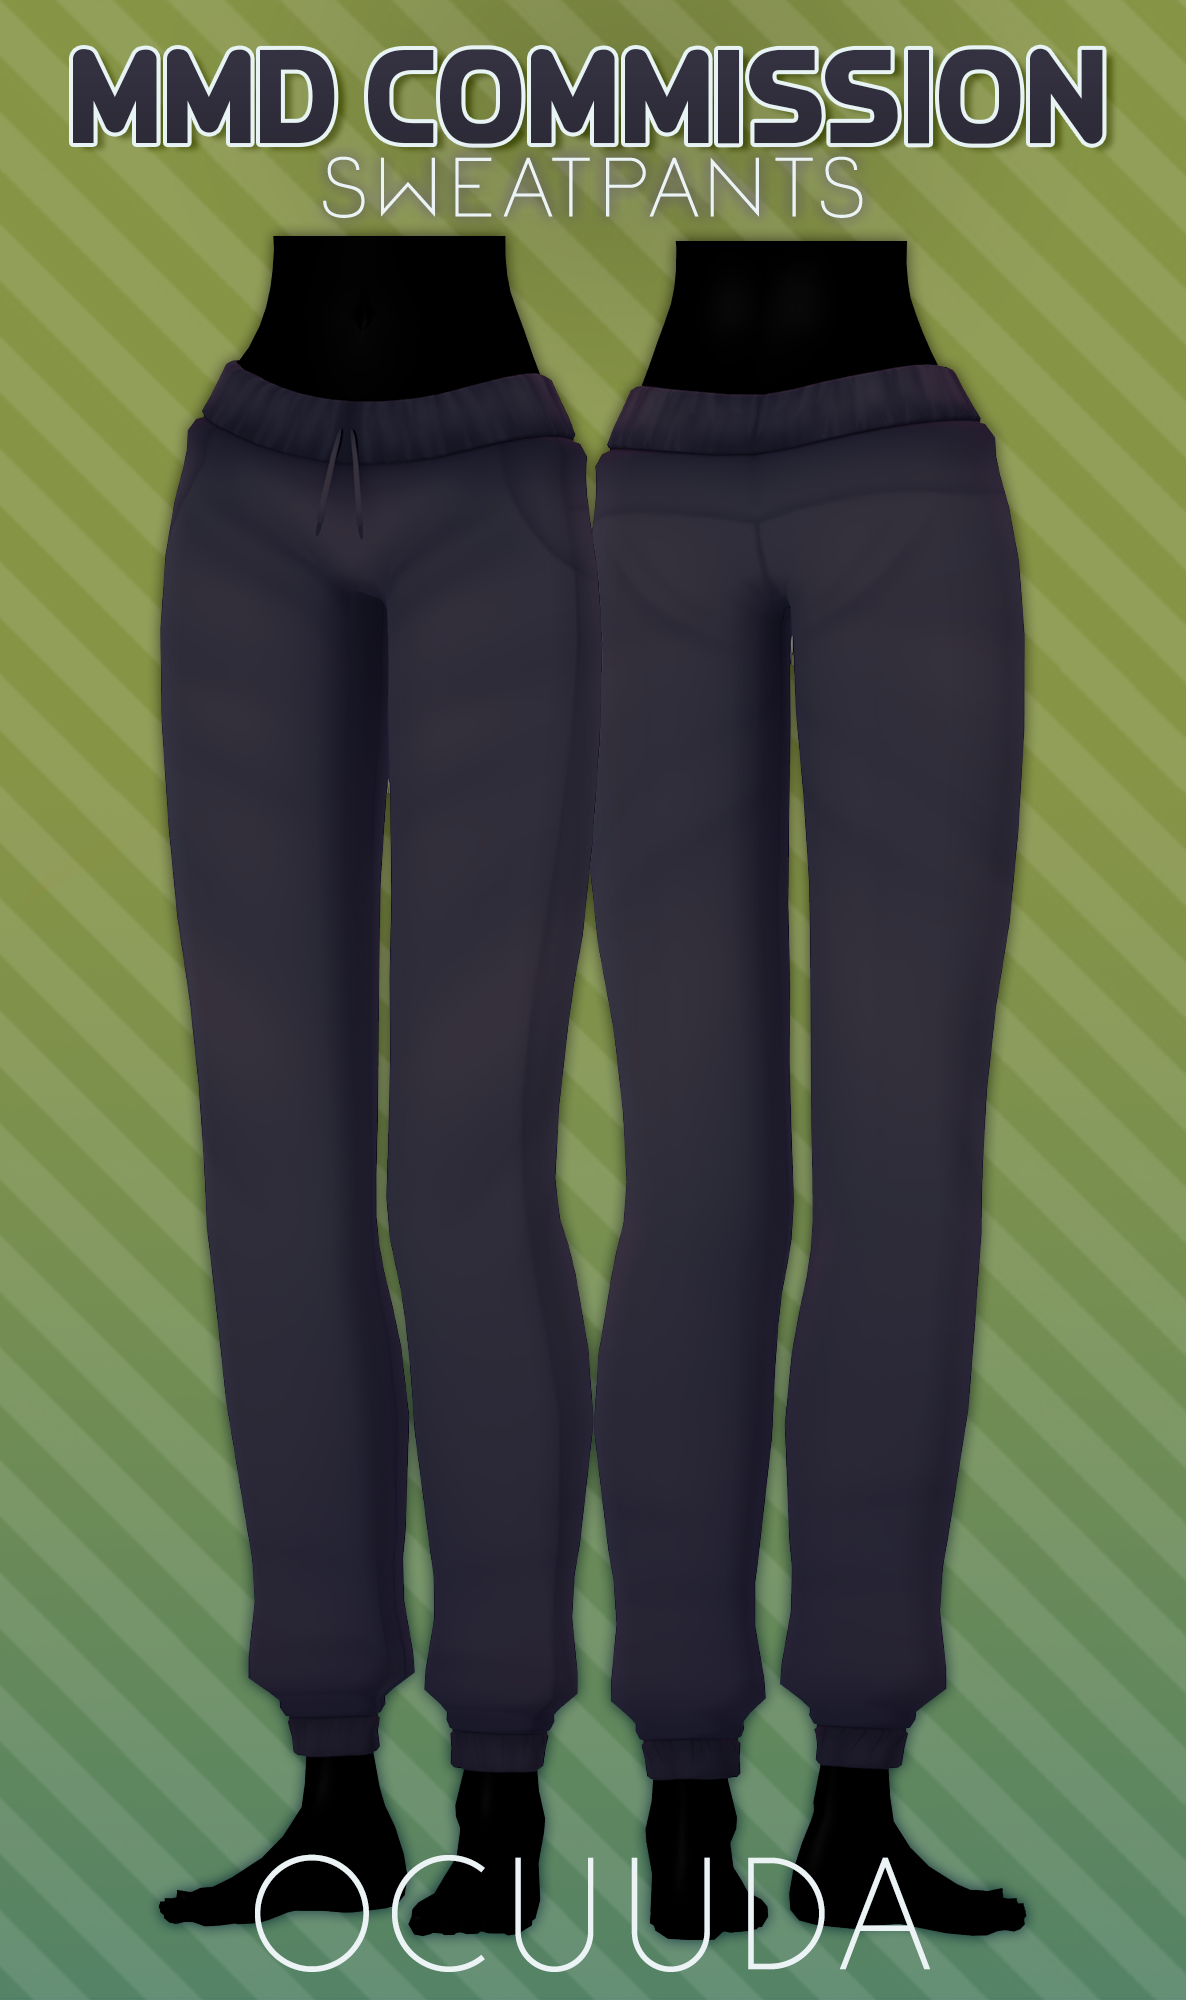 MMD COMMISSION: Sweatpants by Ocuuda on DeviantArt